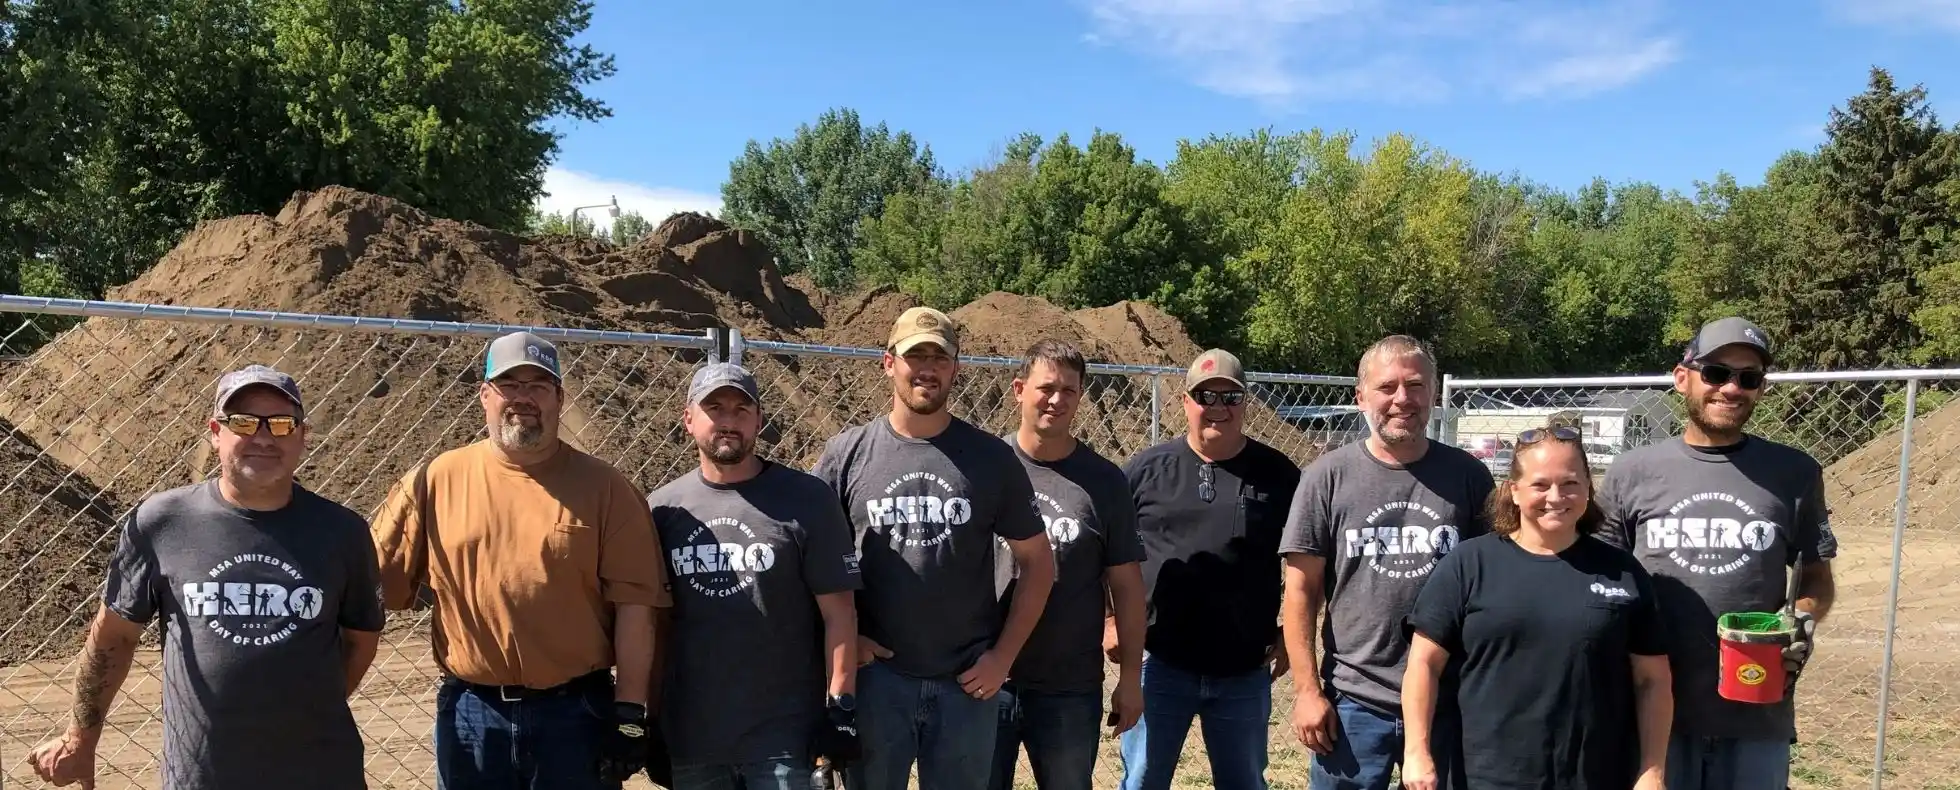 Bismarck Team Members Spend Day of Caring in the Community